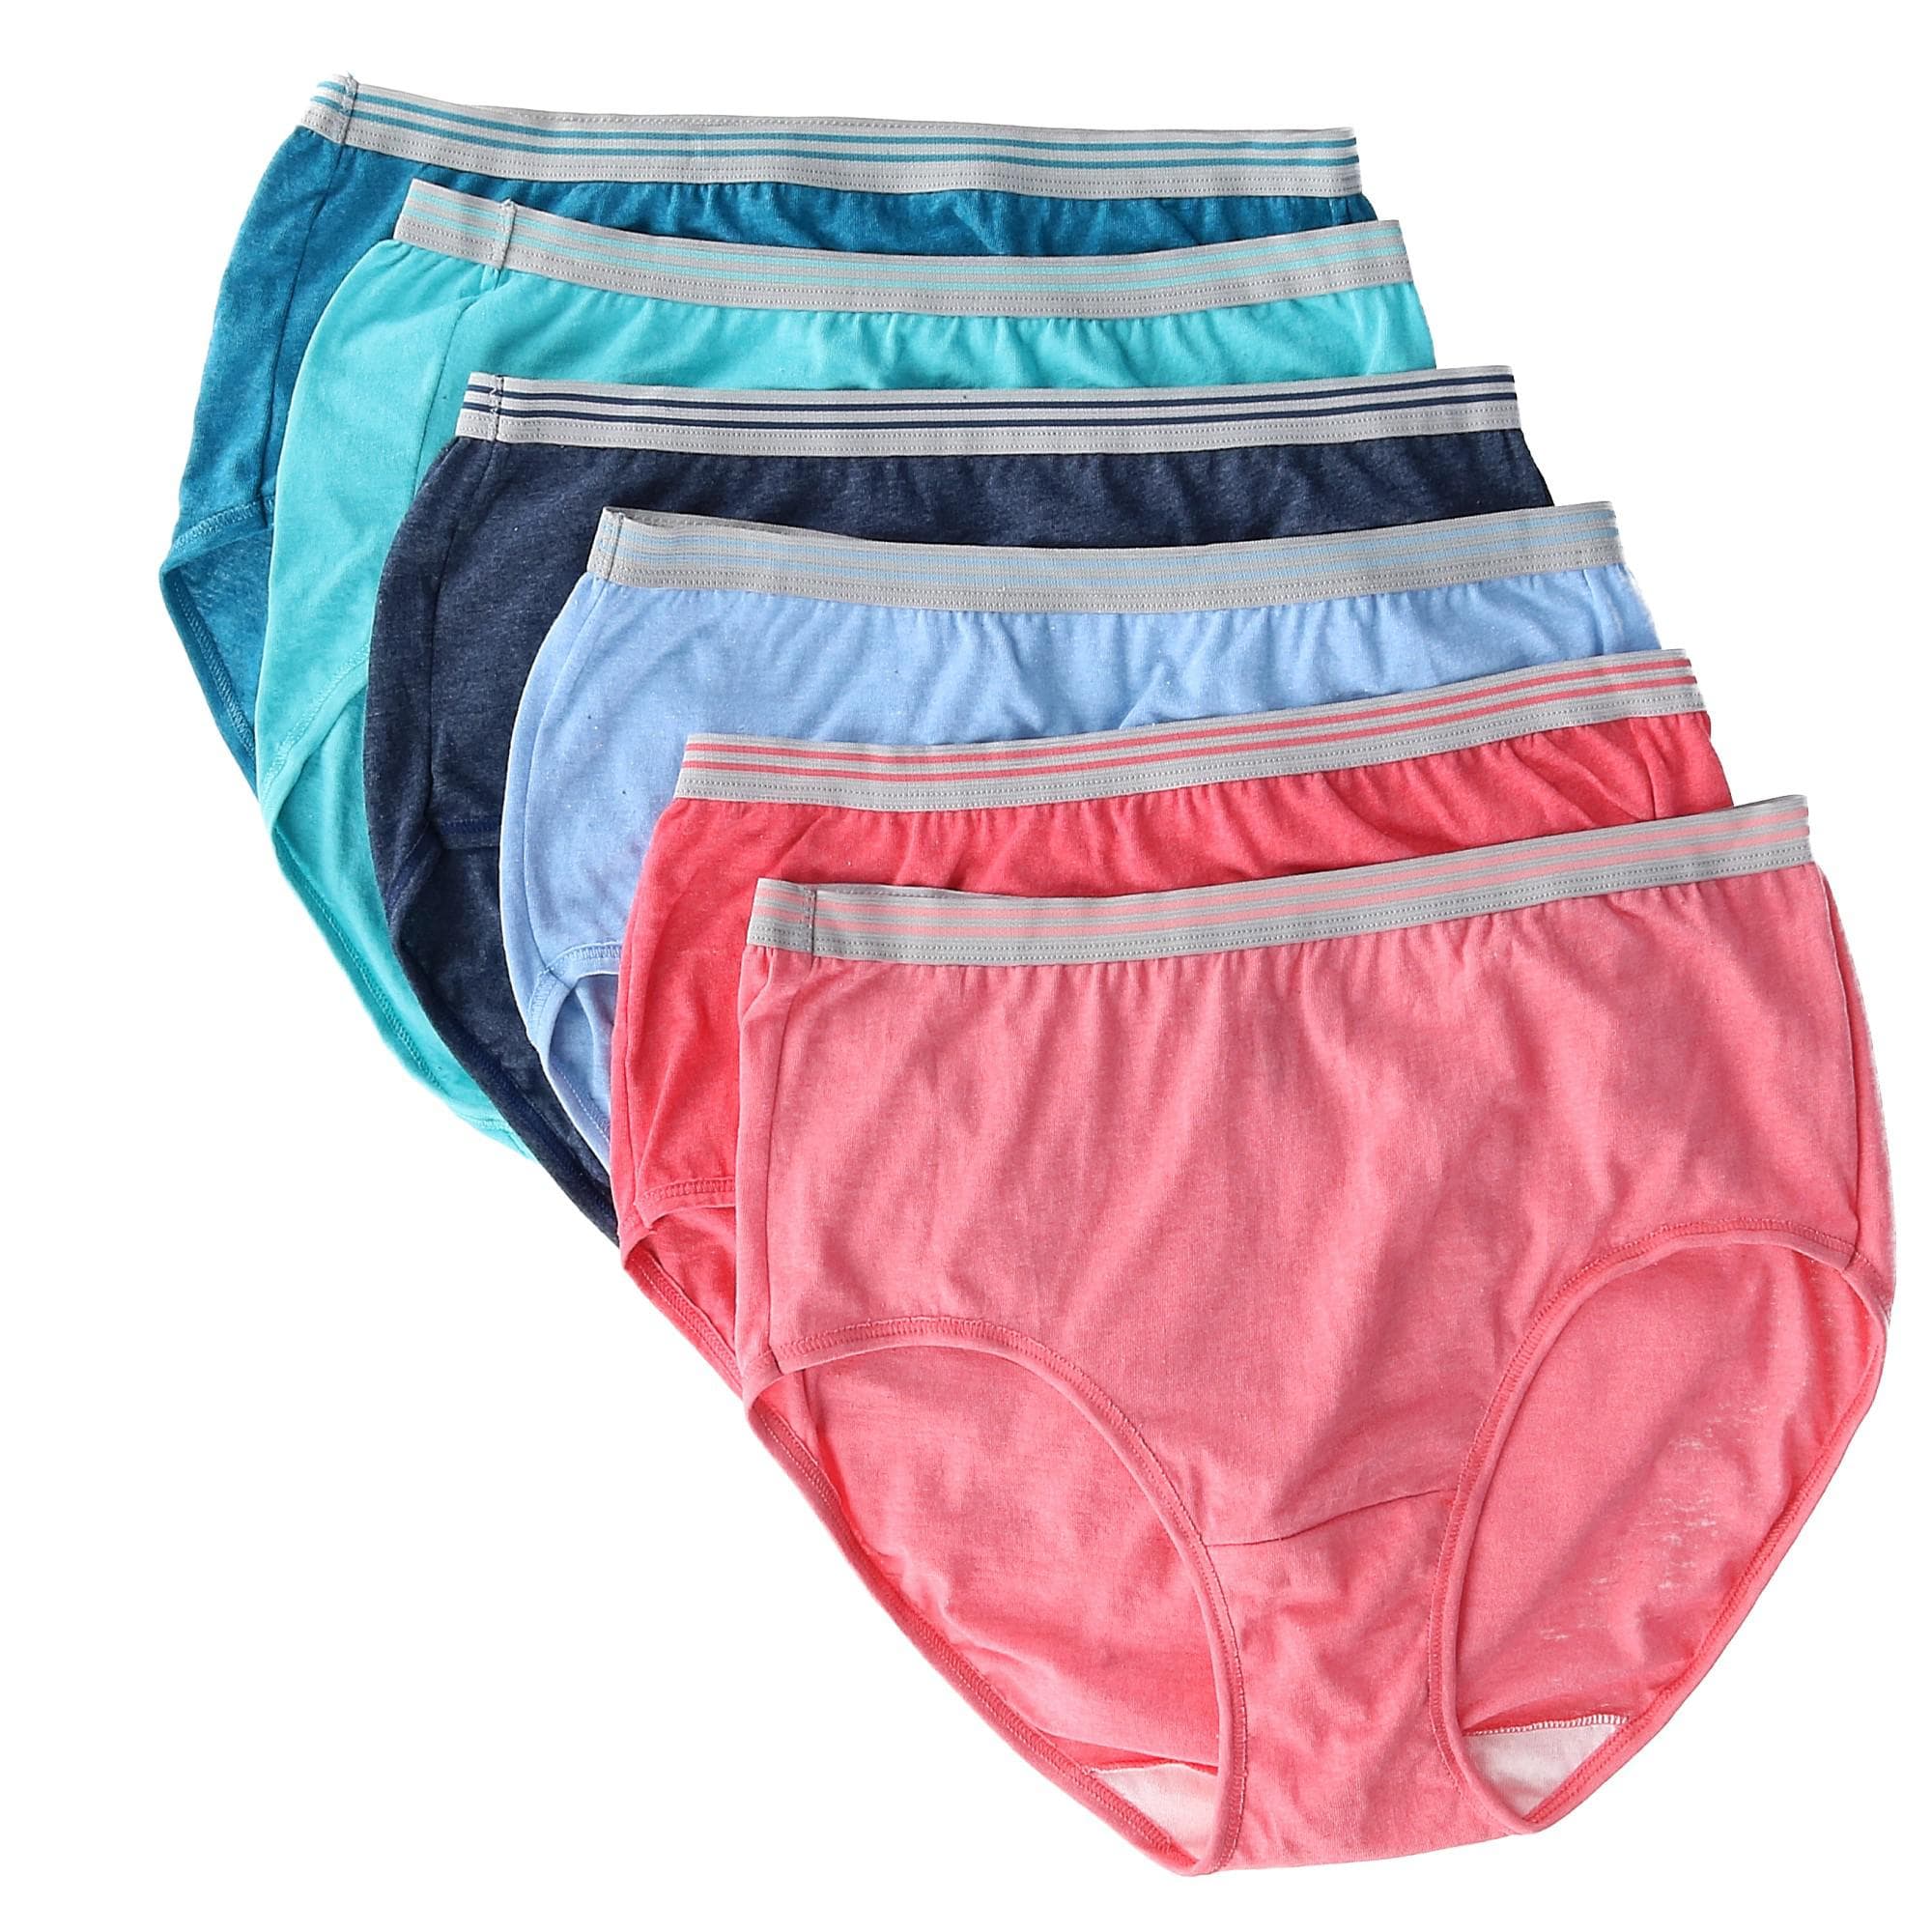 Fruit of the Loom Women's Fit for me Plus size underwear, Pack of 6 Assorted